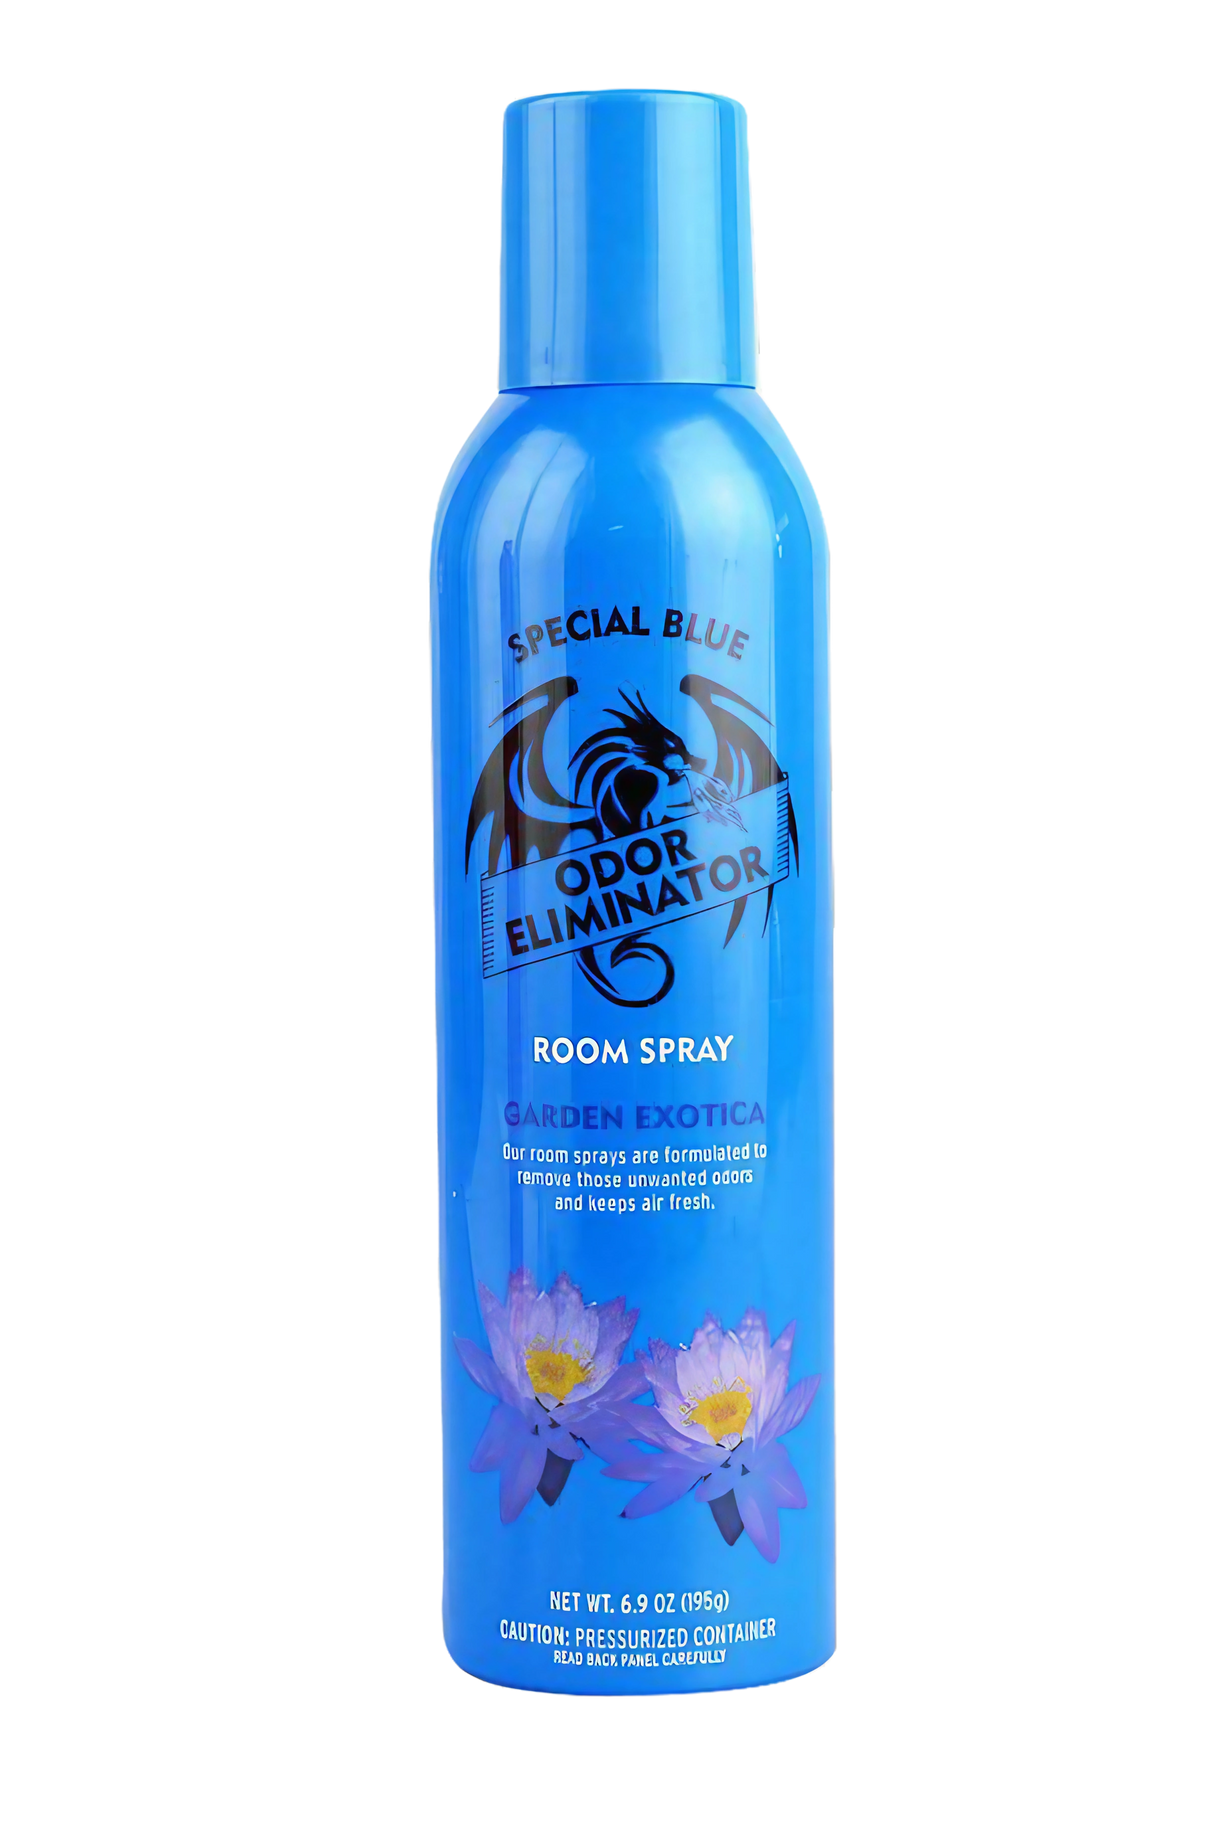 Special Blue 6.9oz Garden Exotica Room Spray, blue bottle with floral design, front view